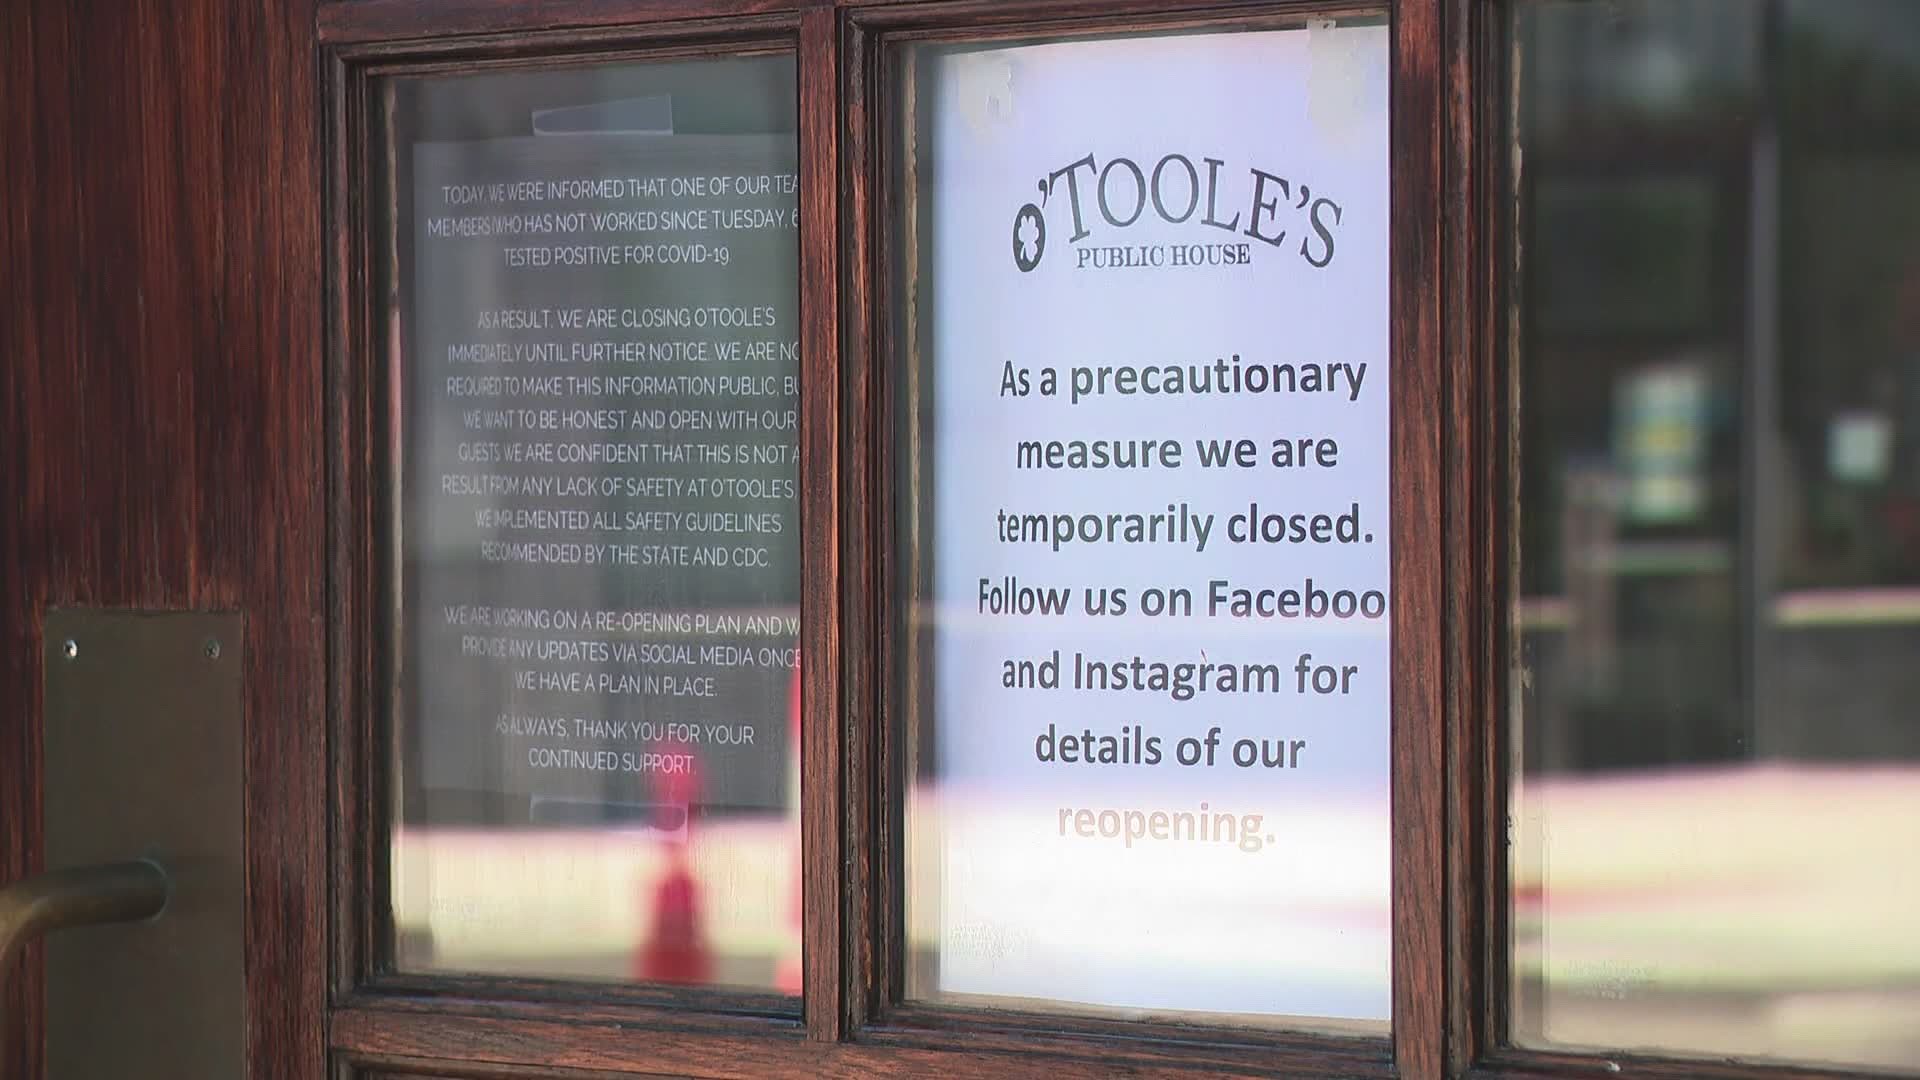 As Michiganders are venturing out, bars and restaurants are issuing emergency closures as staff test positive for COVID-19.